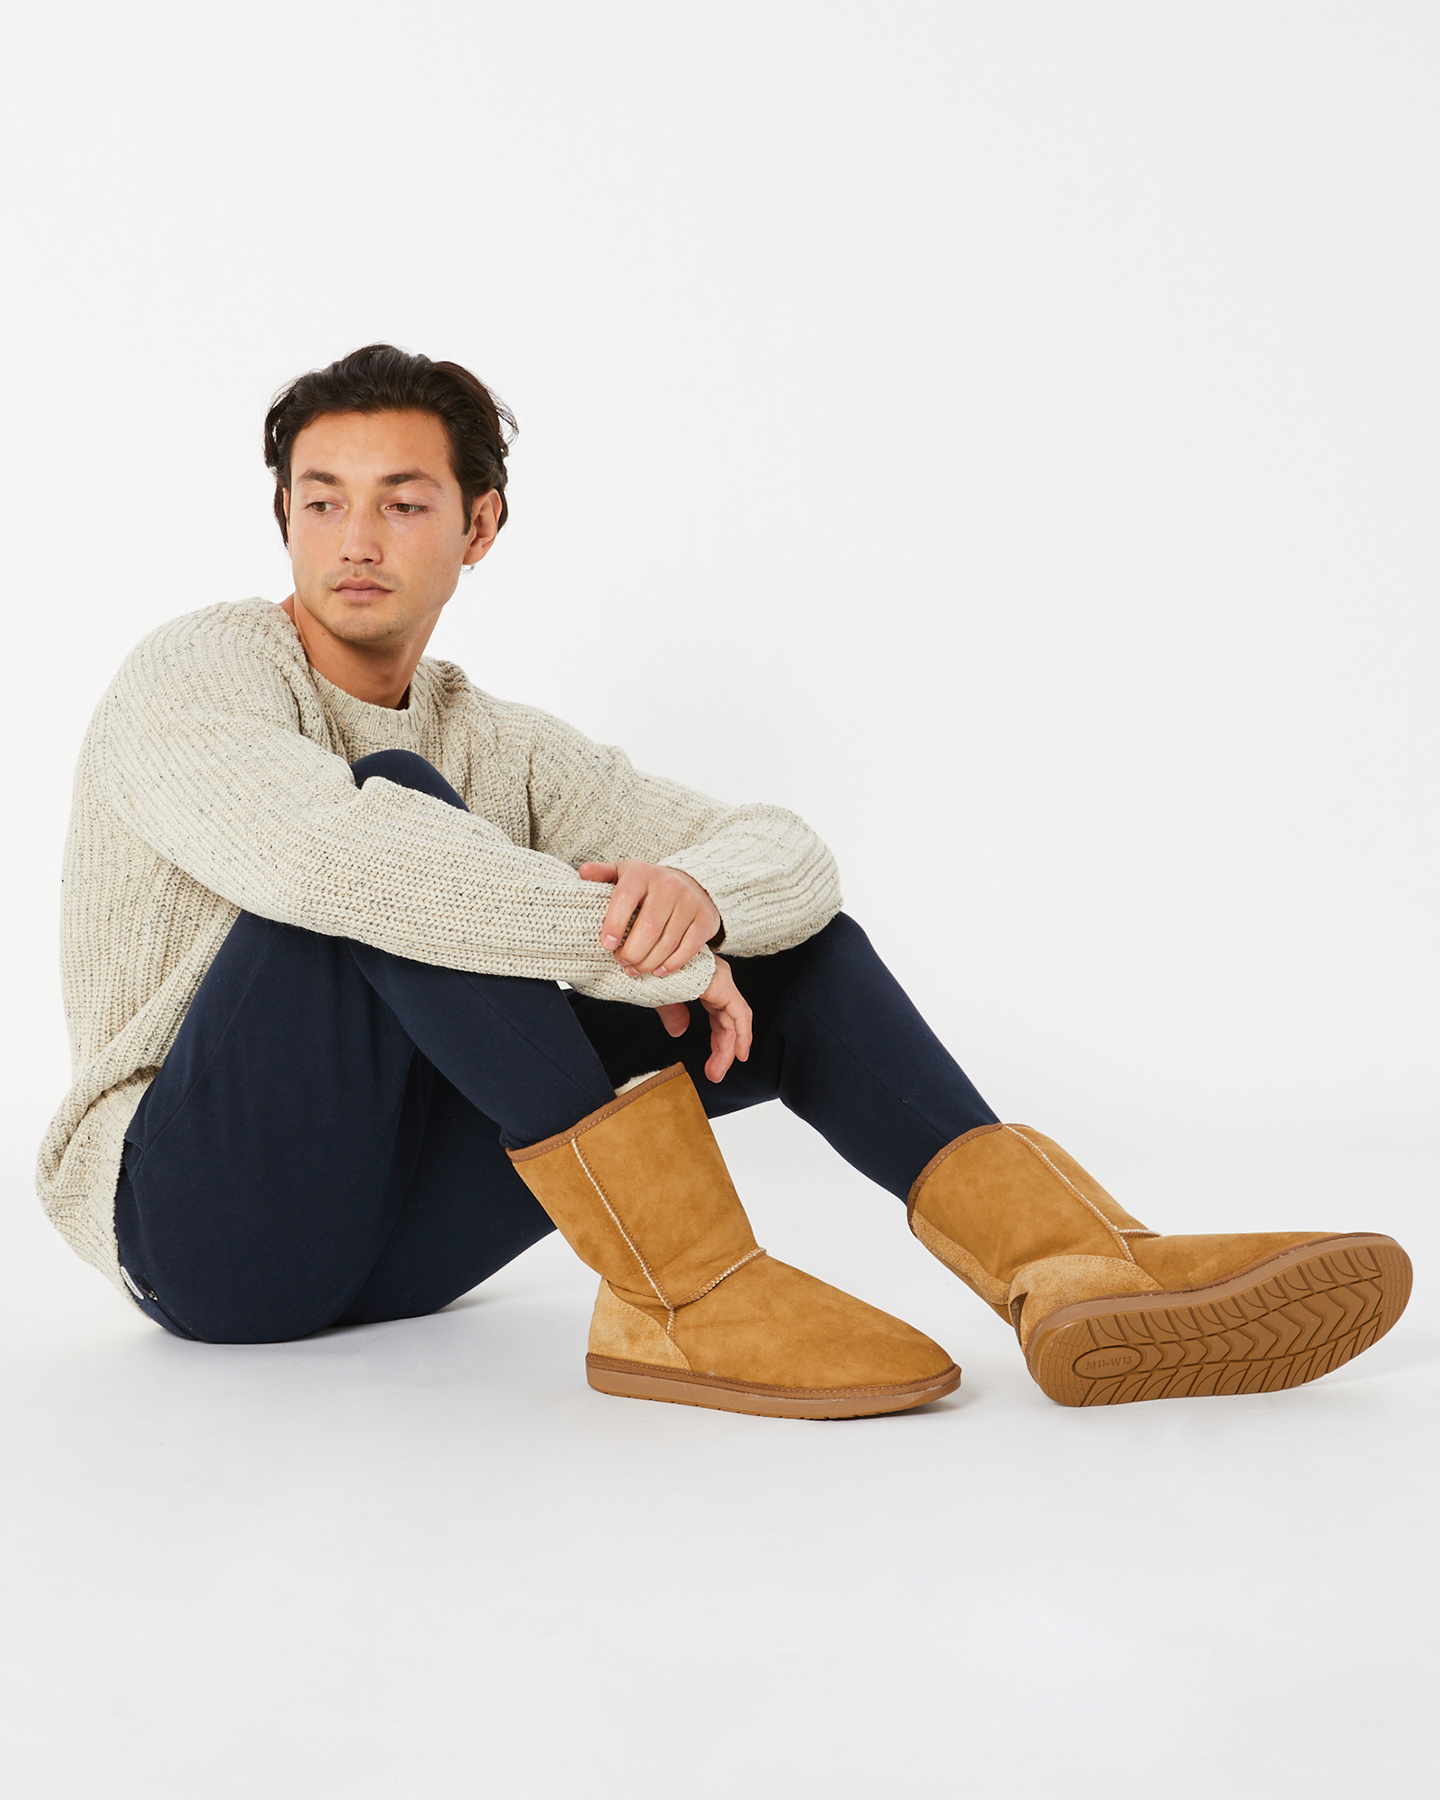 male ugg boots